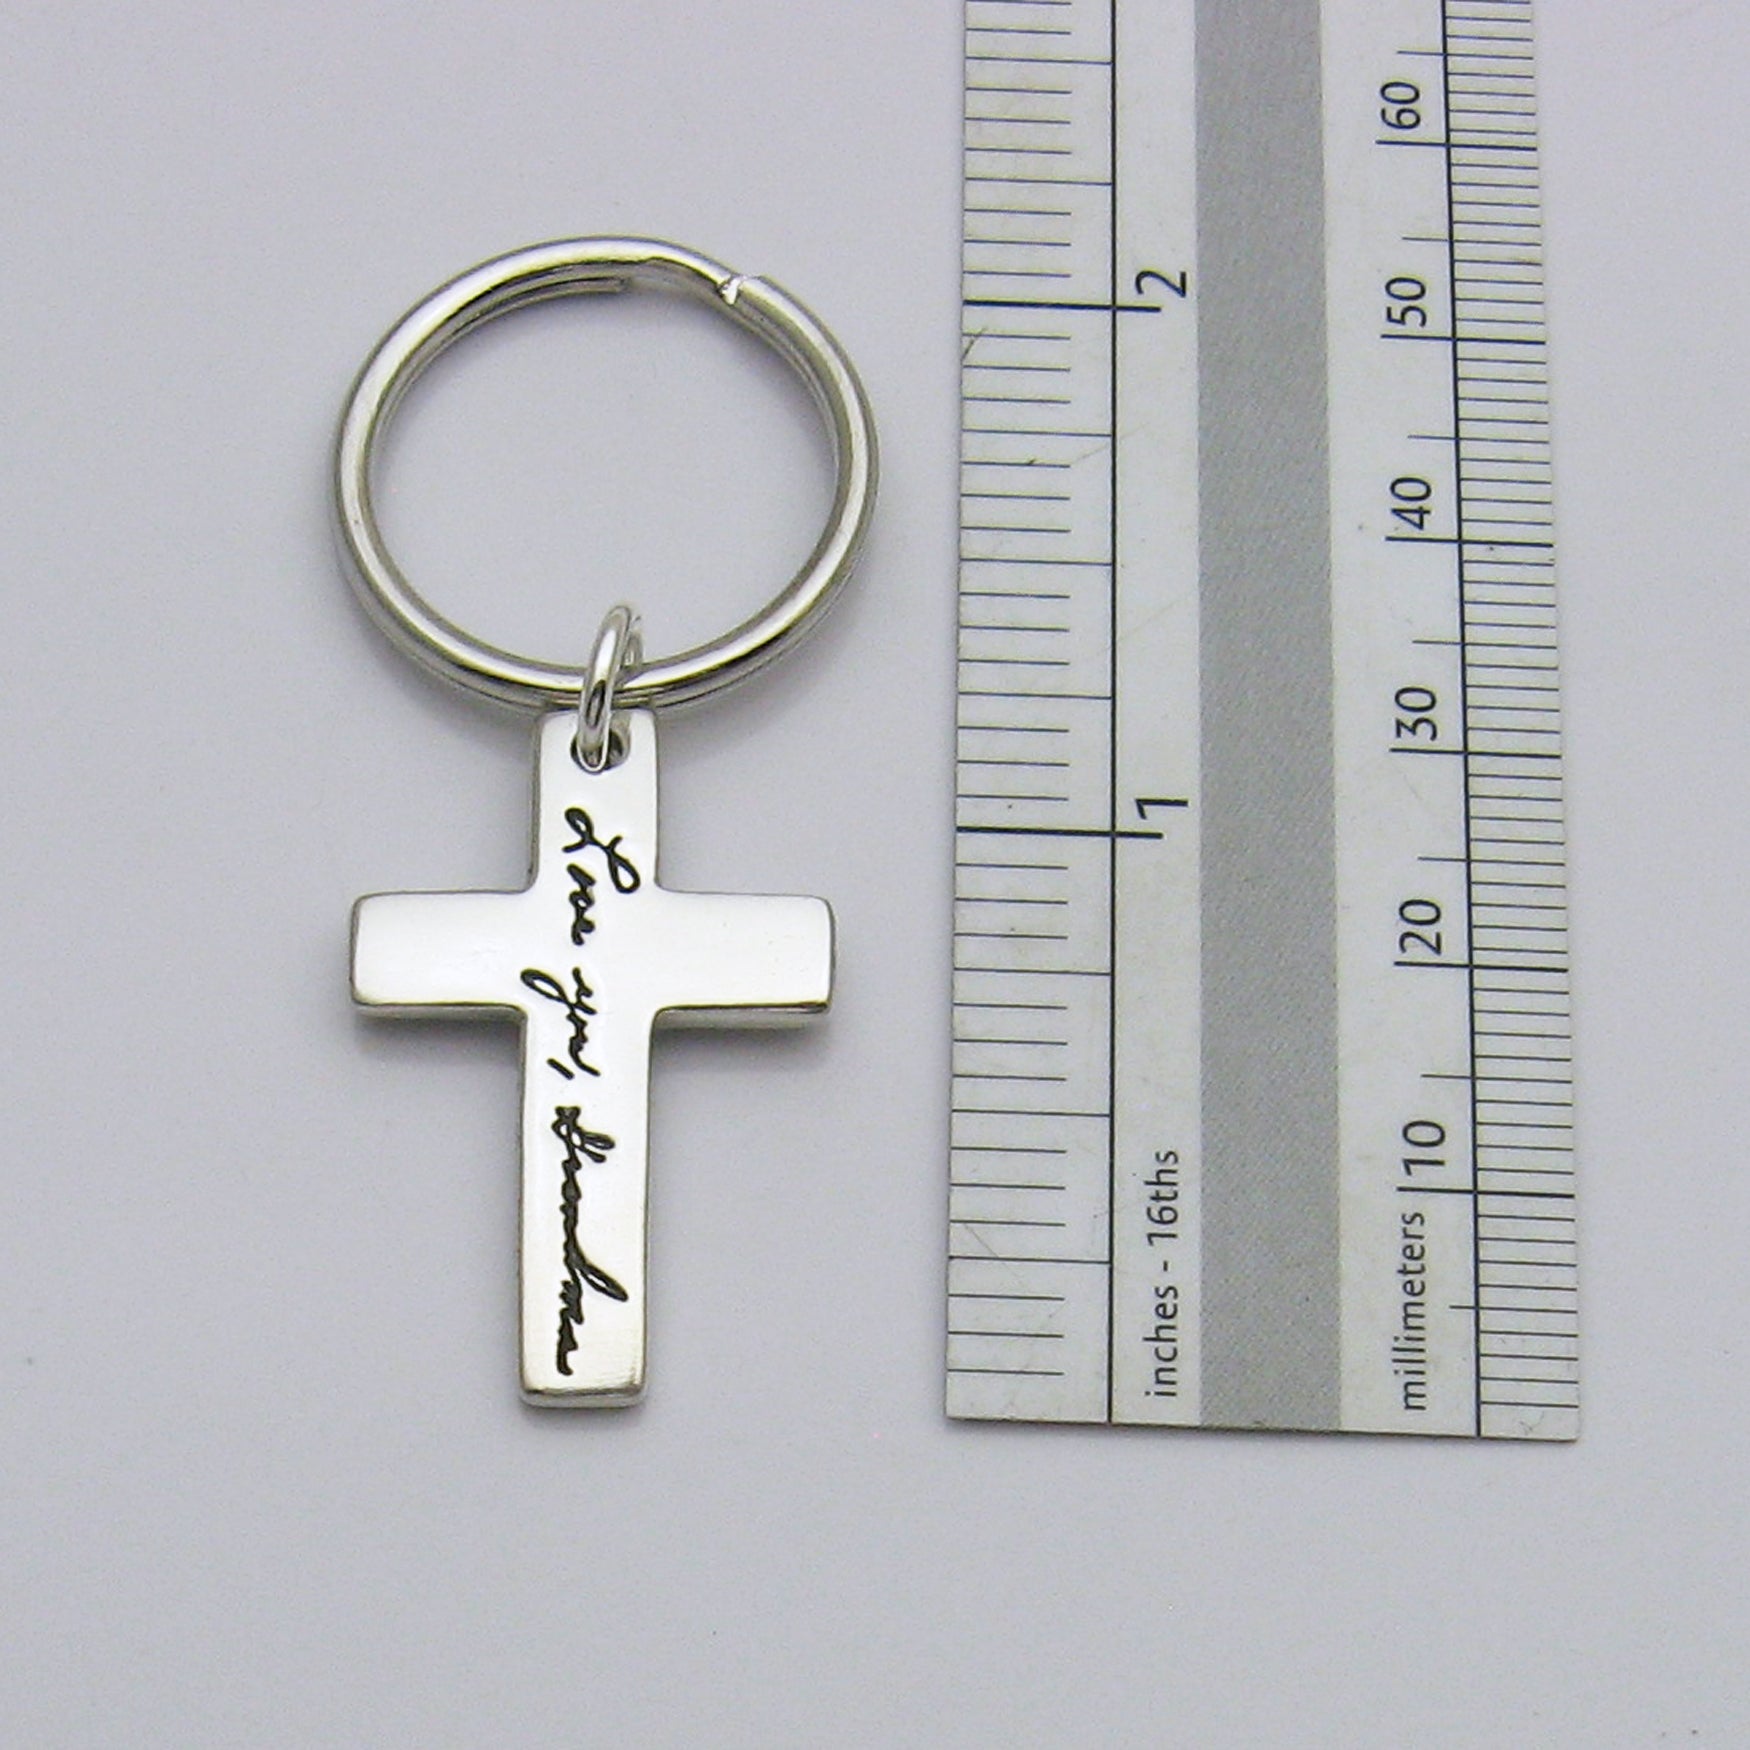 Cross Handwriting Keychain Next to Ruler for Size Reference